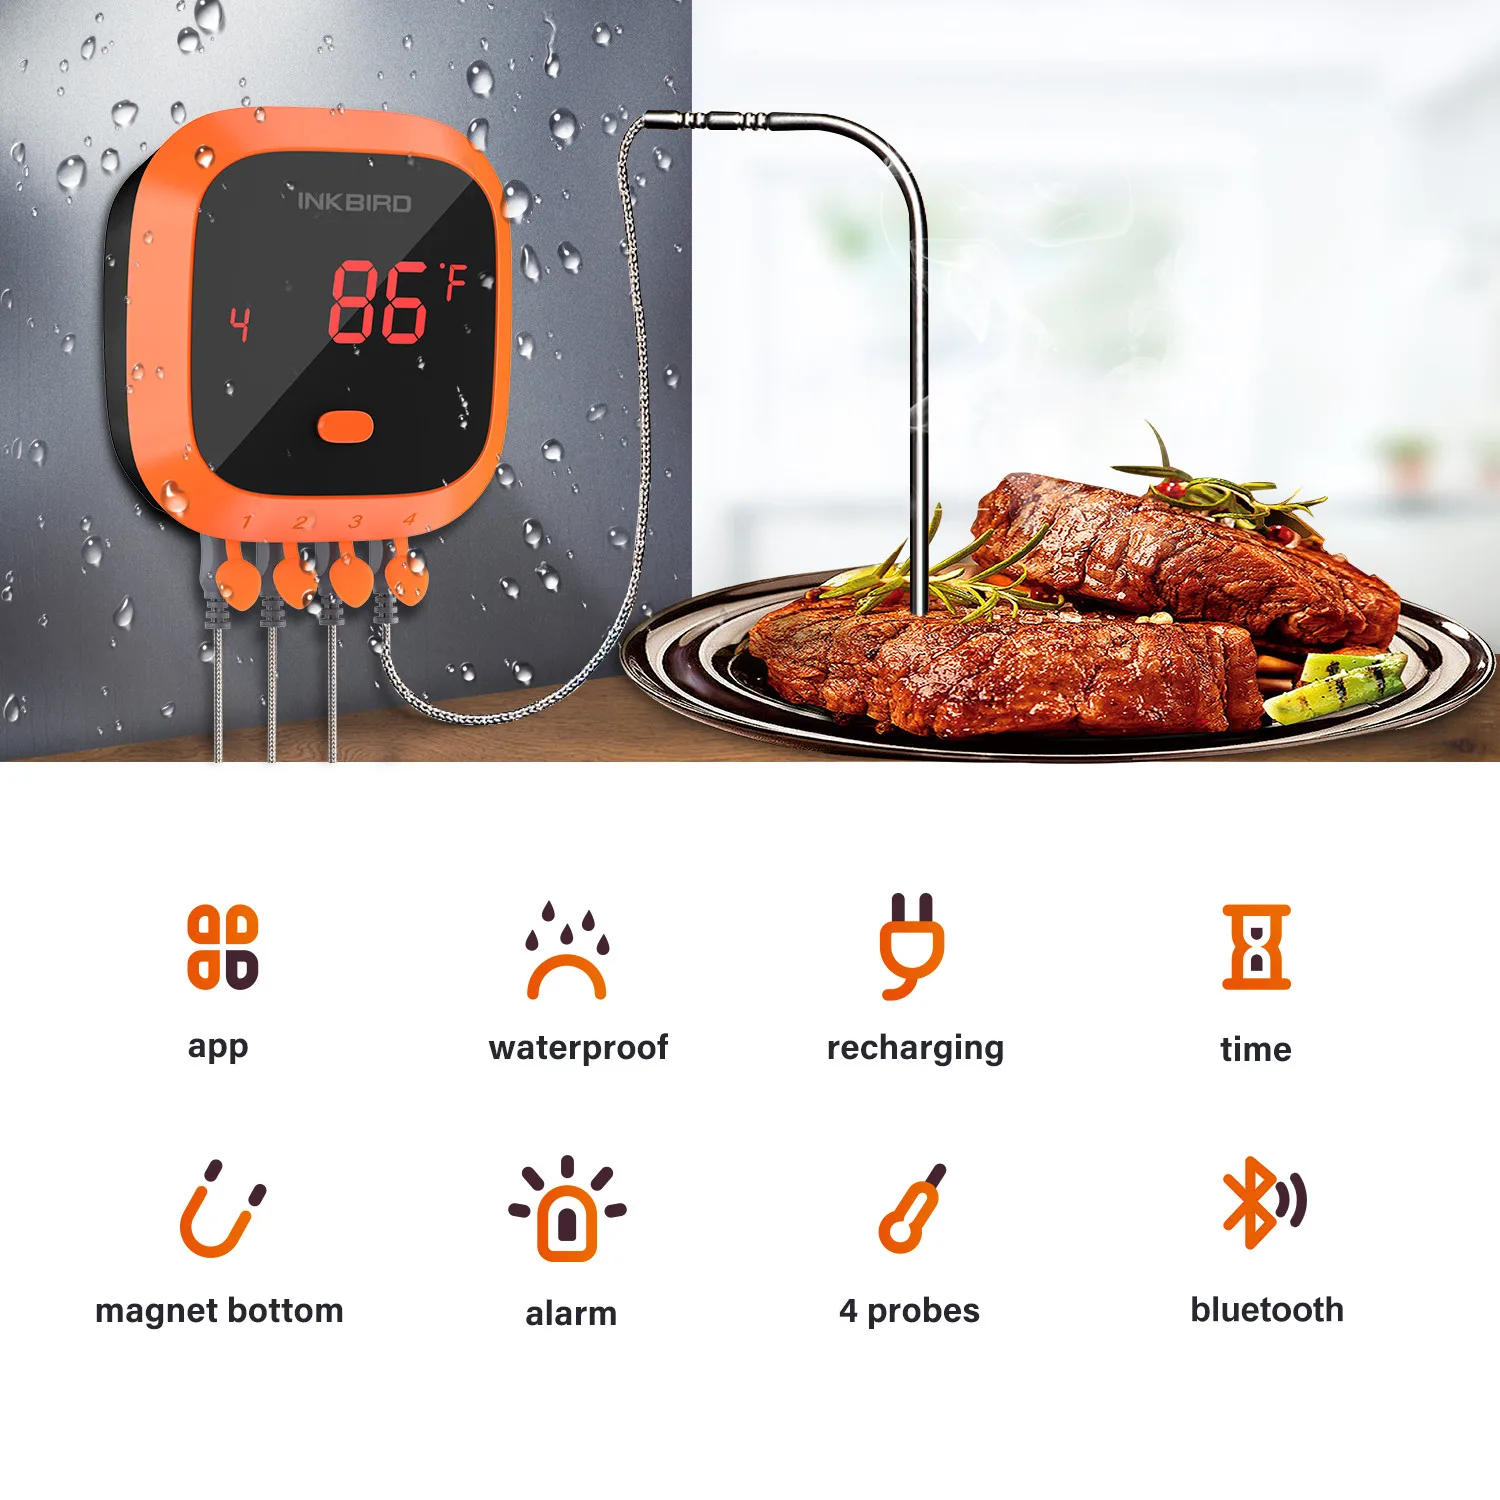 INKBIRD IHT-2PB Digital Bluetooth Meat Thermometer With 1 External Probe  Instant Readout IPX5 Waterproof Rechargeable Free APP - AliExpress